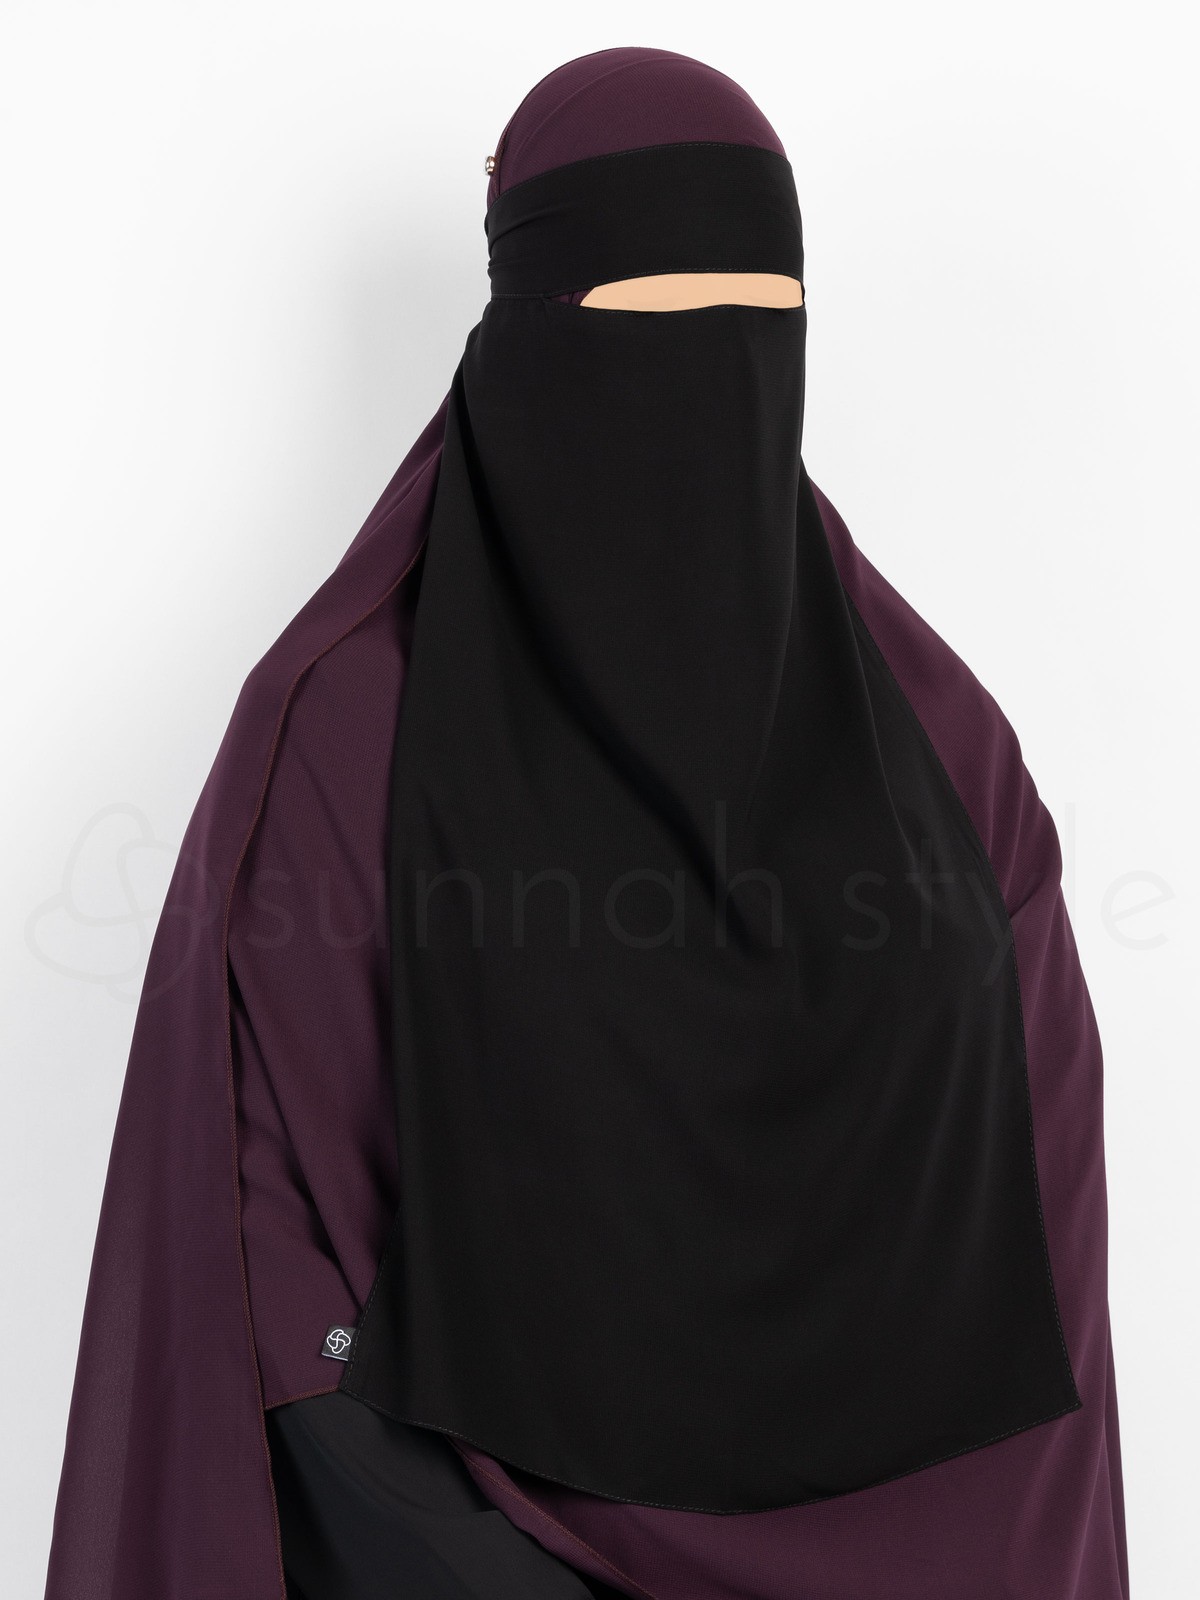 Sunnah Style - Long One Layer Niqab (Black)